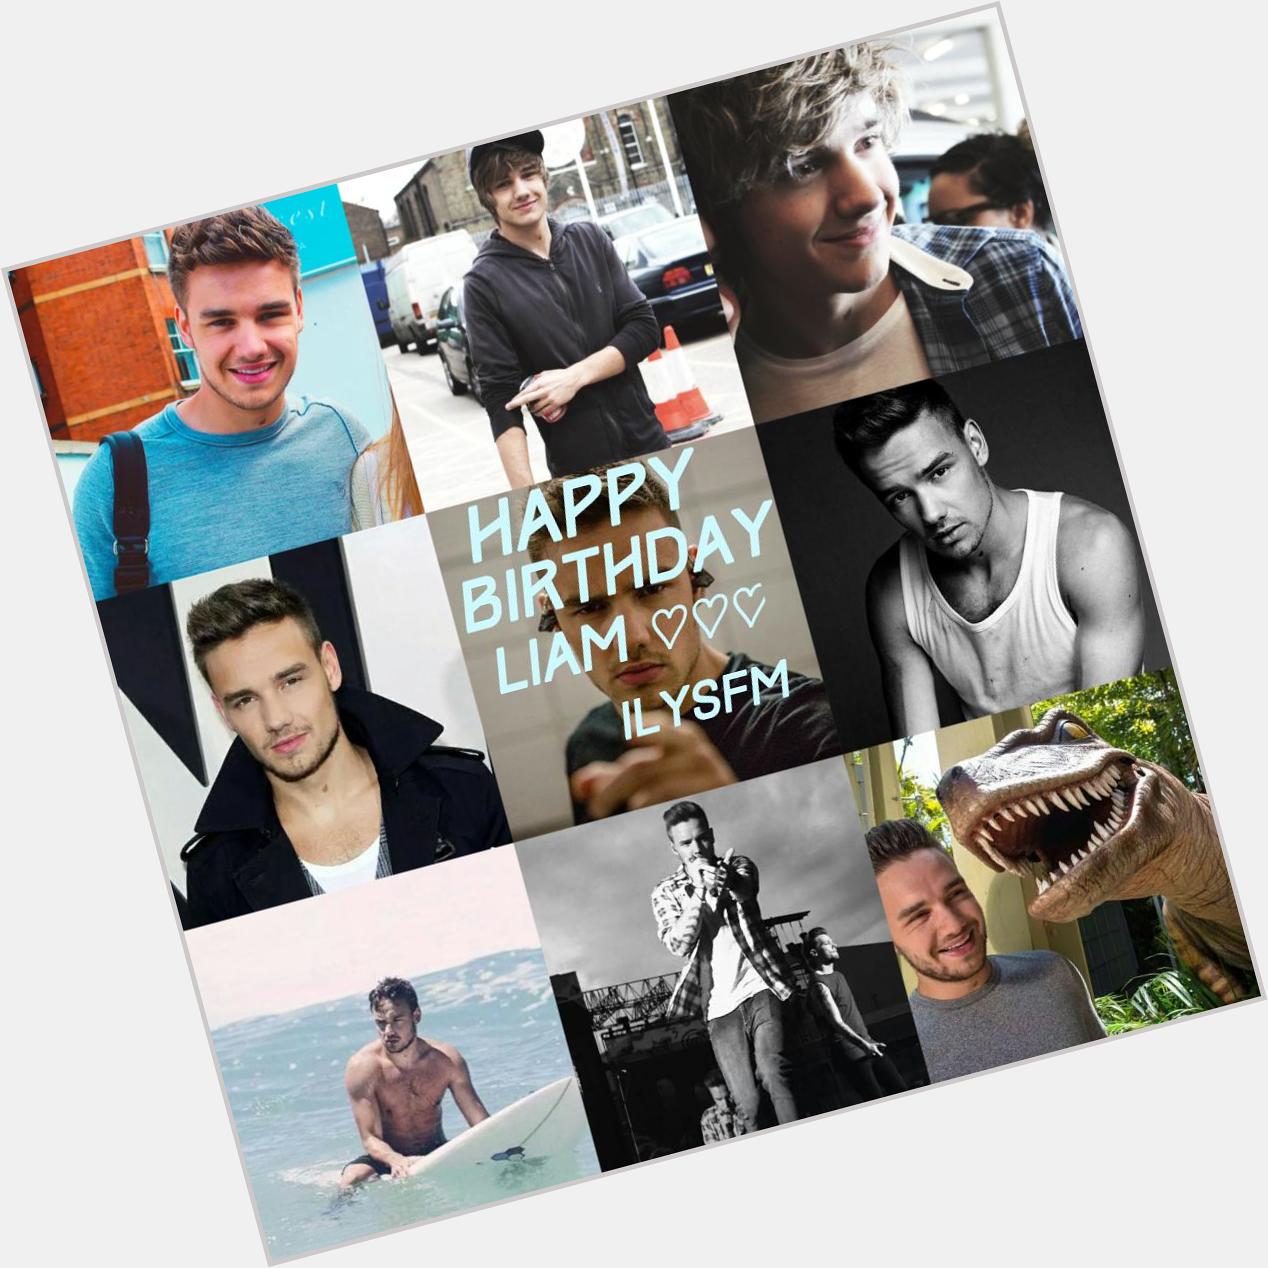   Hii Liam, happy birthday!! I wish you all the best! Hope you good! xx 